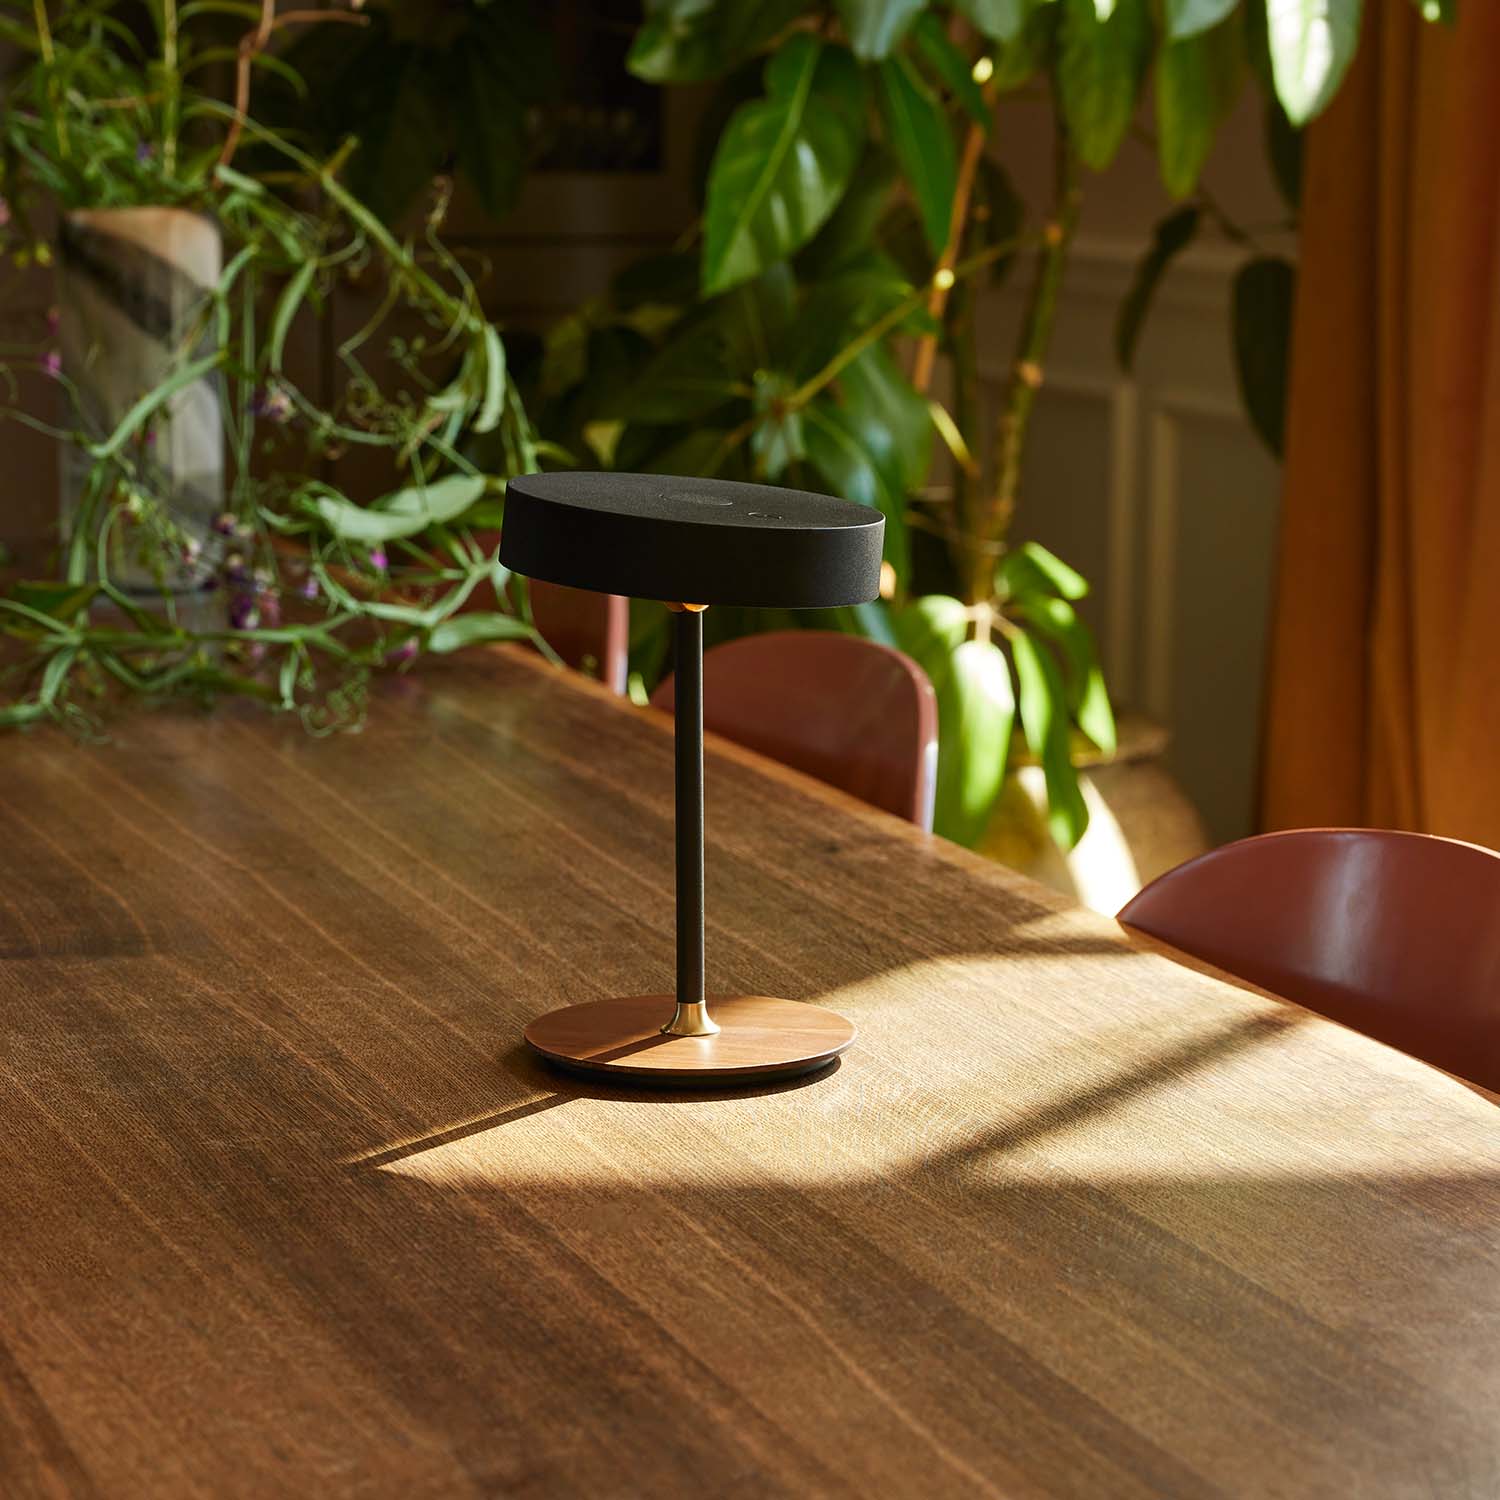 ON THE MOVE - Adjustable wireless designer nomadic table lamp